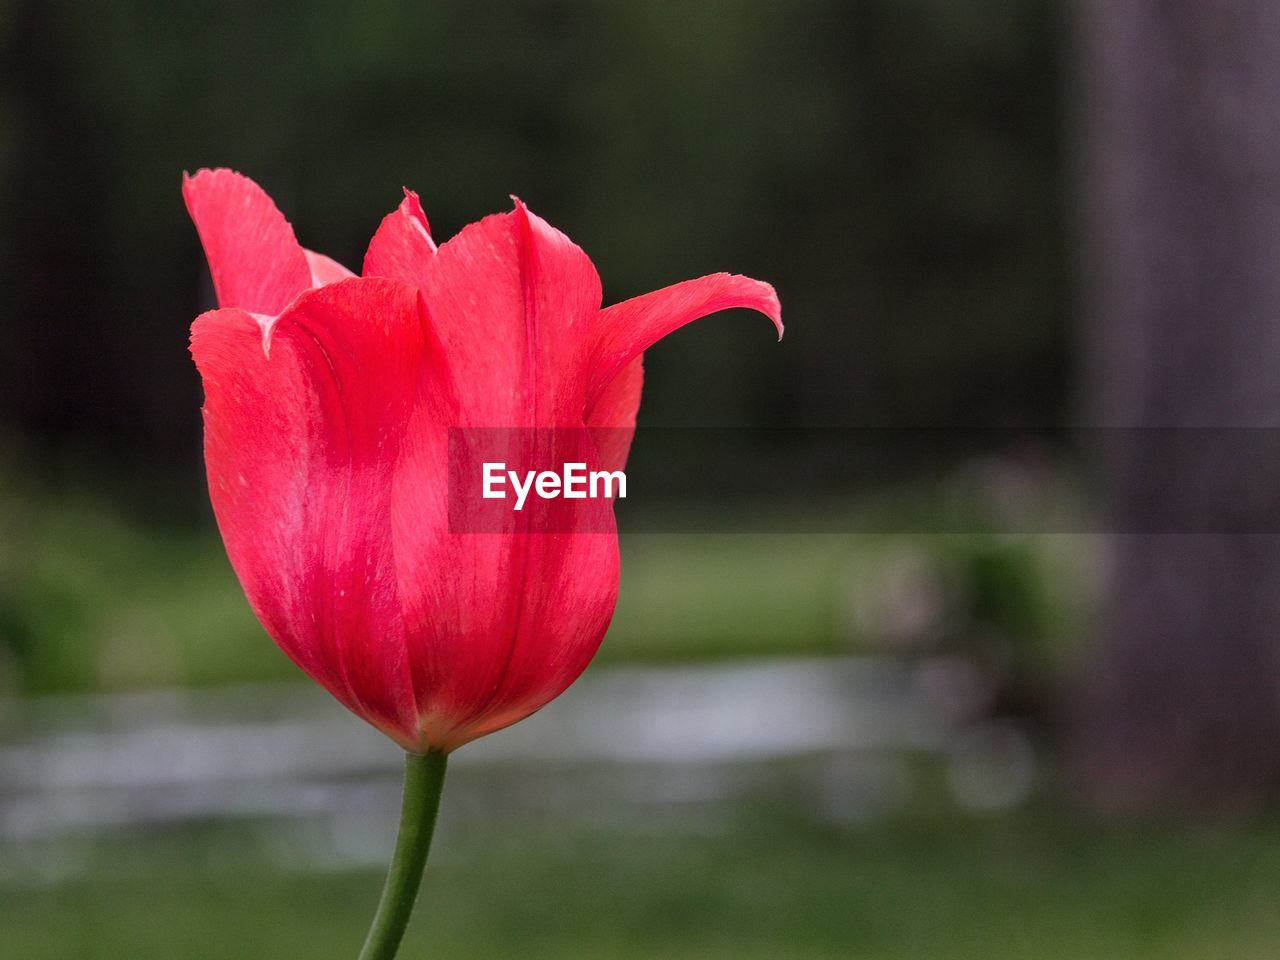 flower, flowering plant, plant, freshness, beauty in nature, petal, close-up, inflorescence, plant stem, fragility, flower head, nature, pink, focus on foreground, red, macro photography, no people, tulip, growth, outdoors, springtime, blossom, rose, water, day, botany